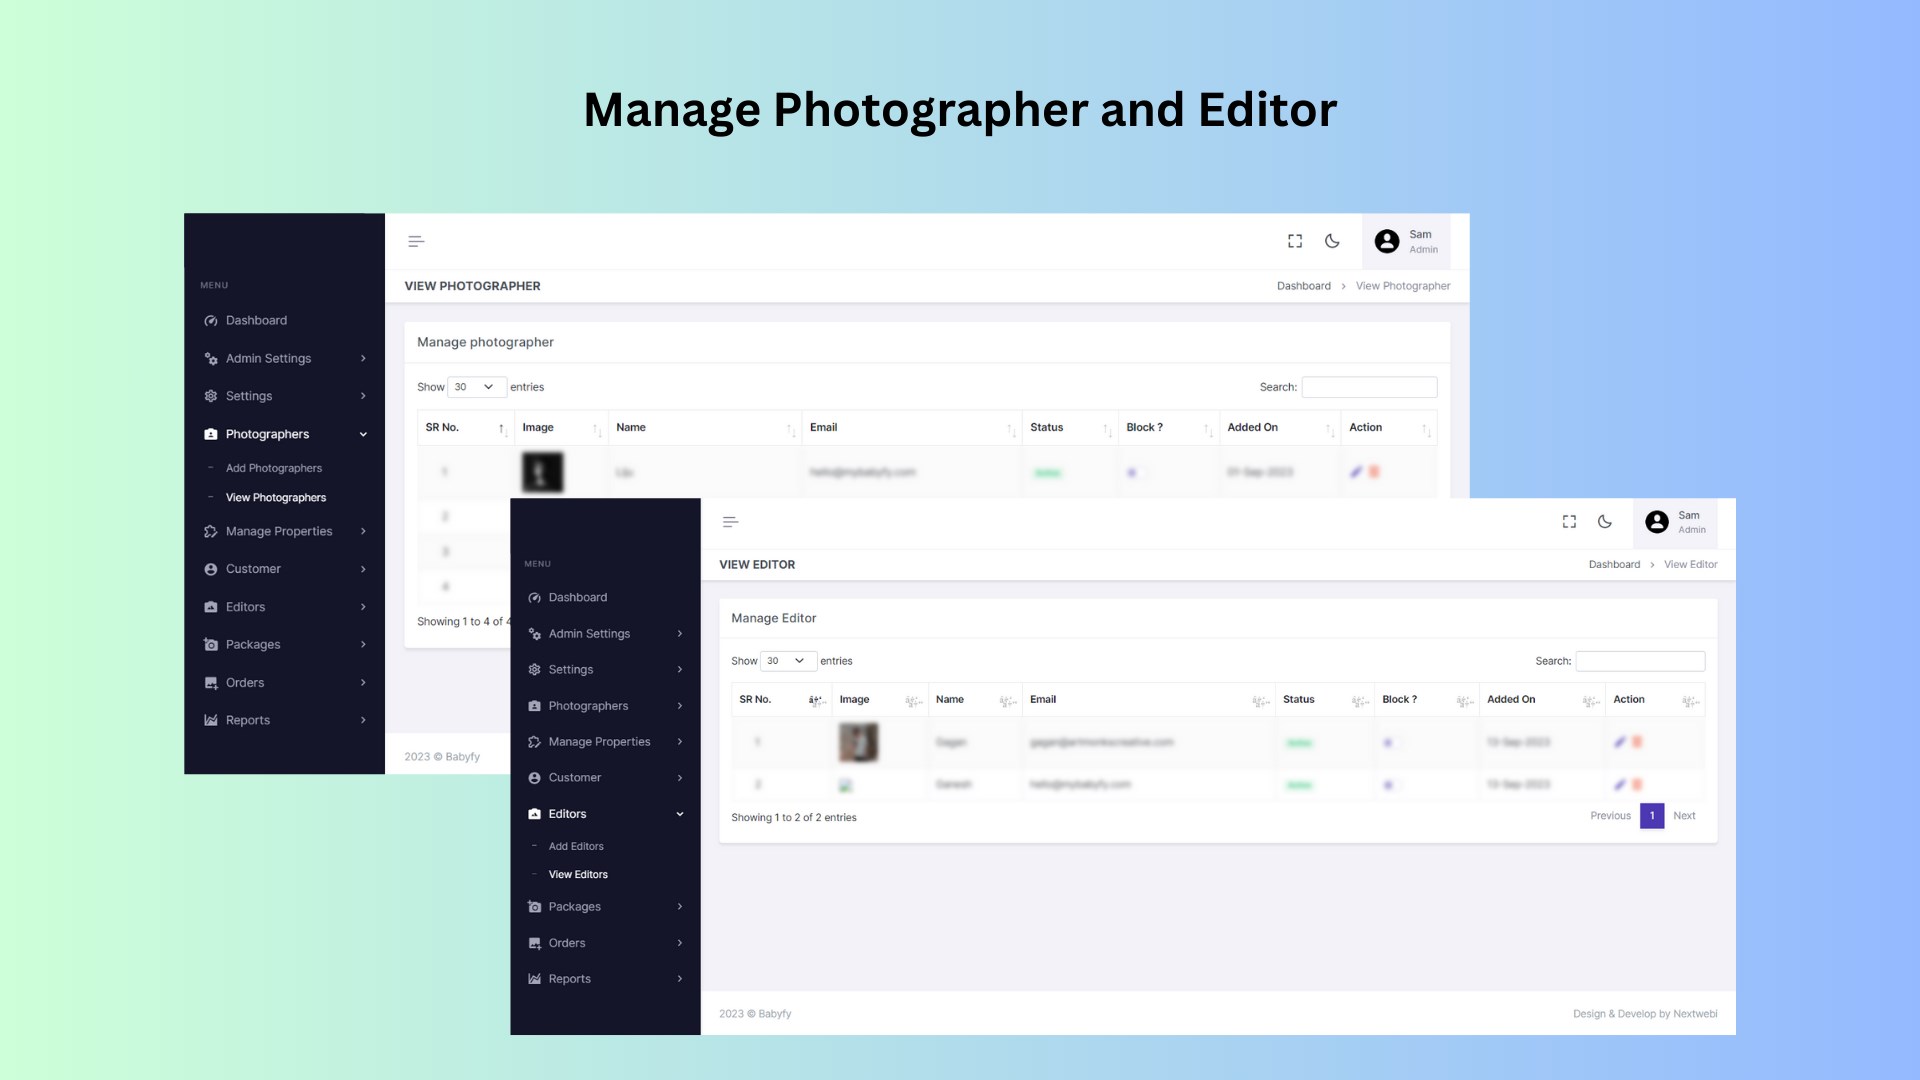 Feature for admin to create photographers and editors accounts, enabling them to manage and block users as needed.